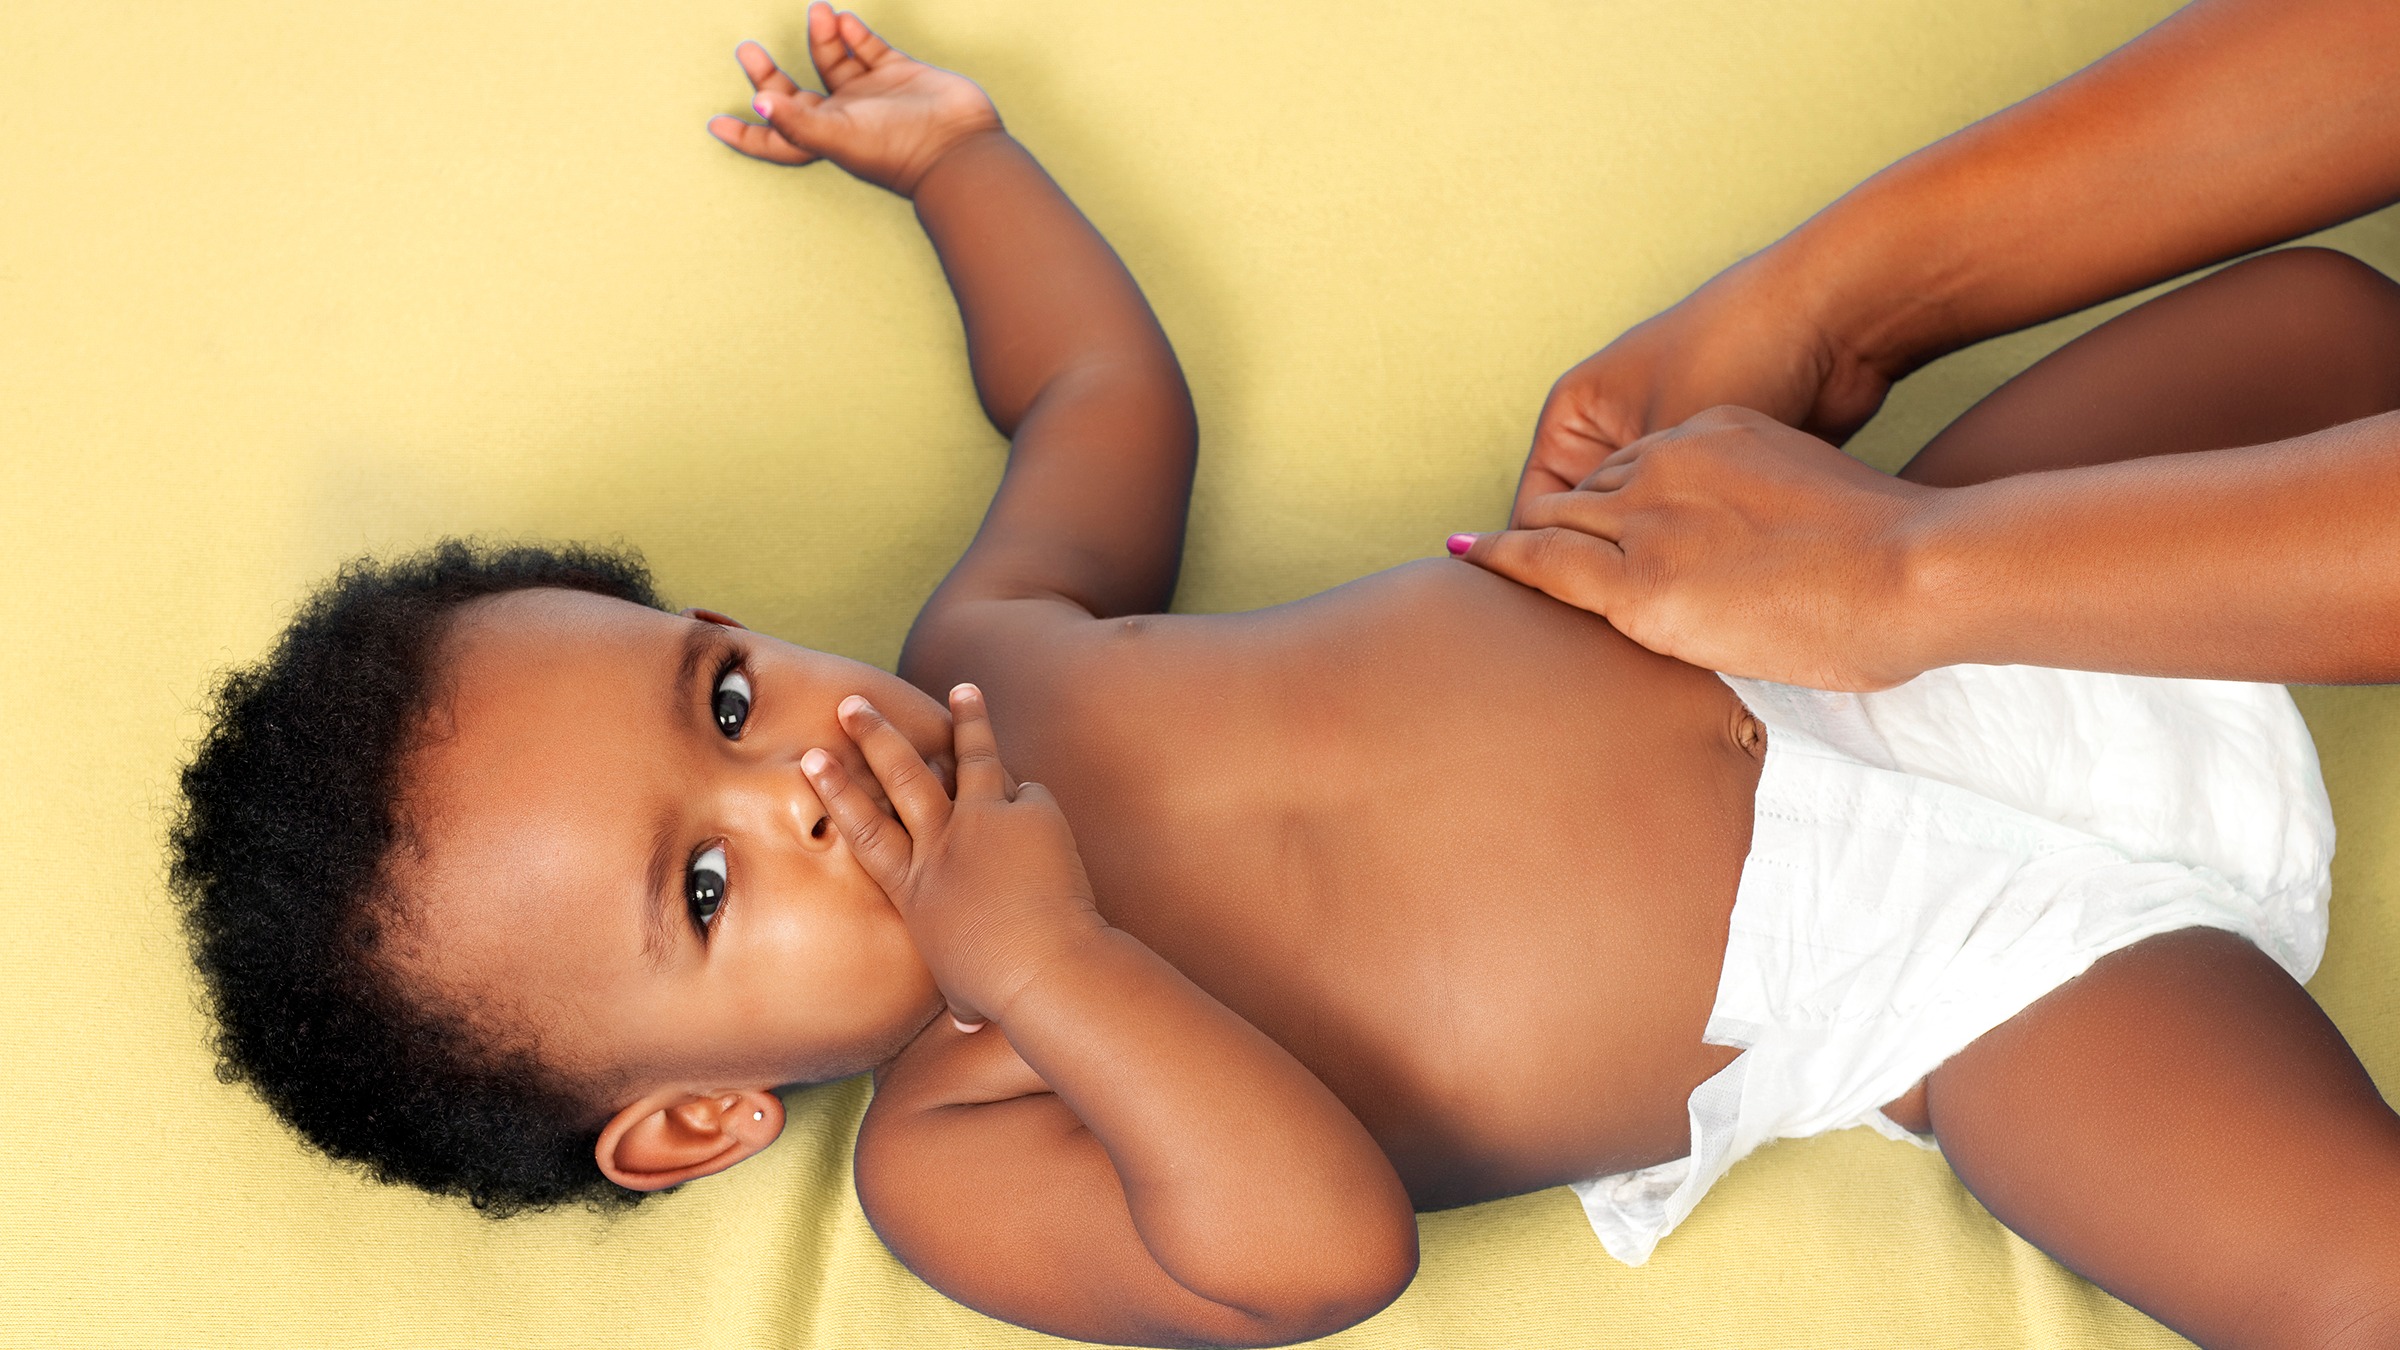 Are disposable diapers more likely than cloth diapers to cause diaper rash?